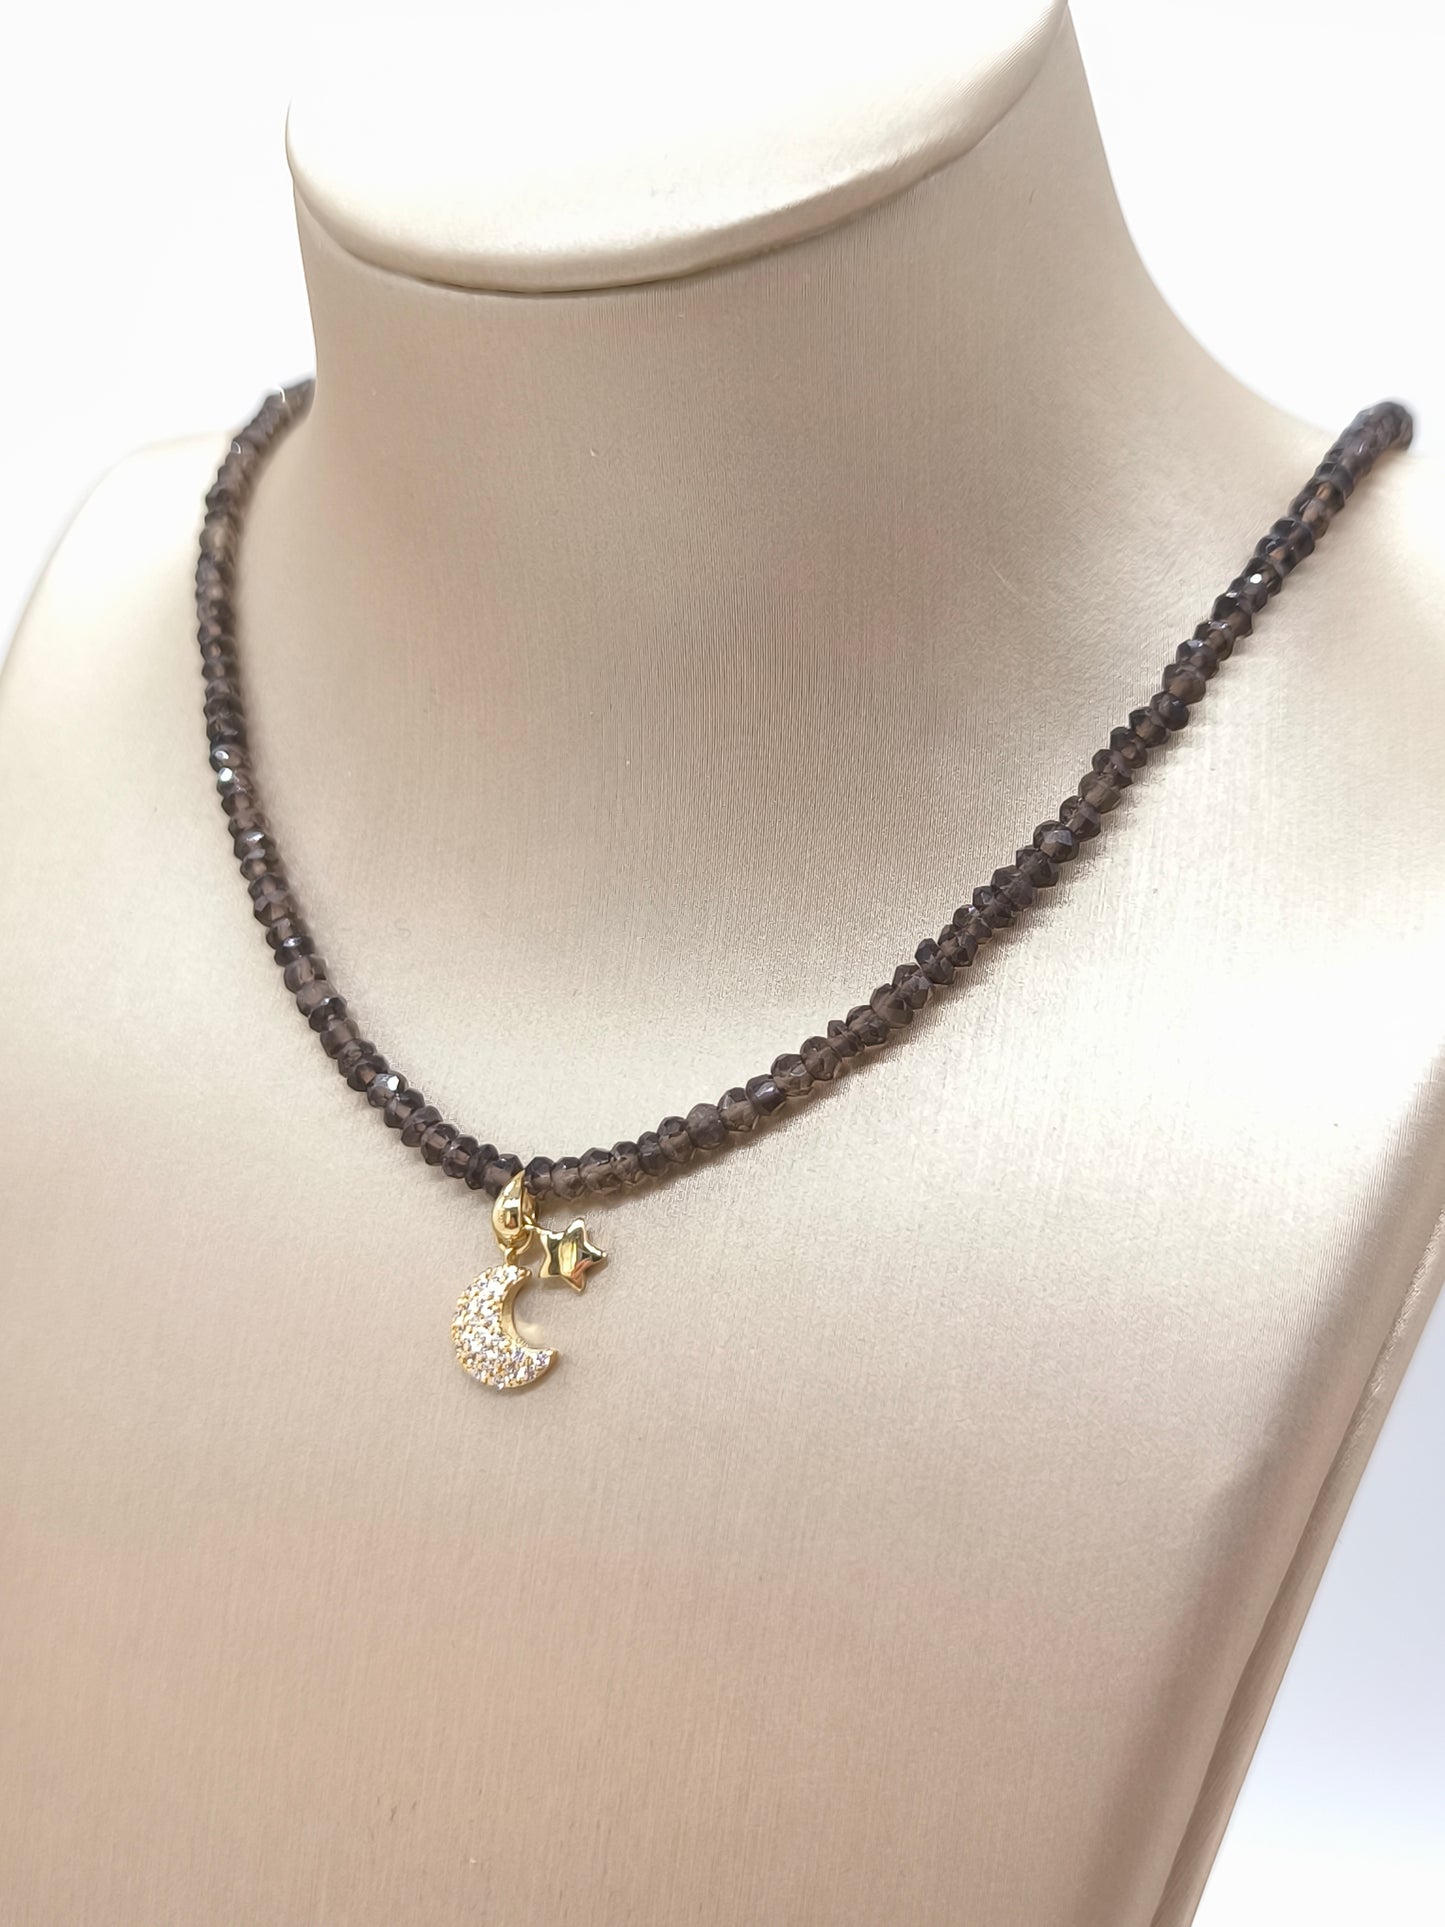 Star and moon necklace in gold and semi-precious stones